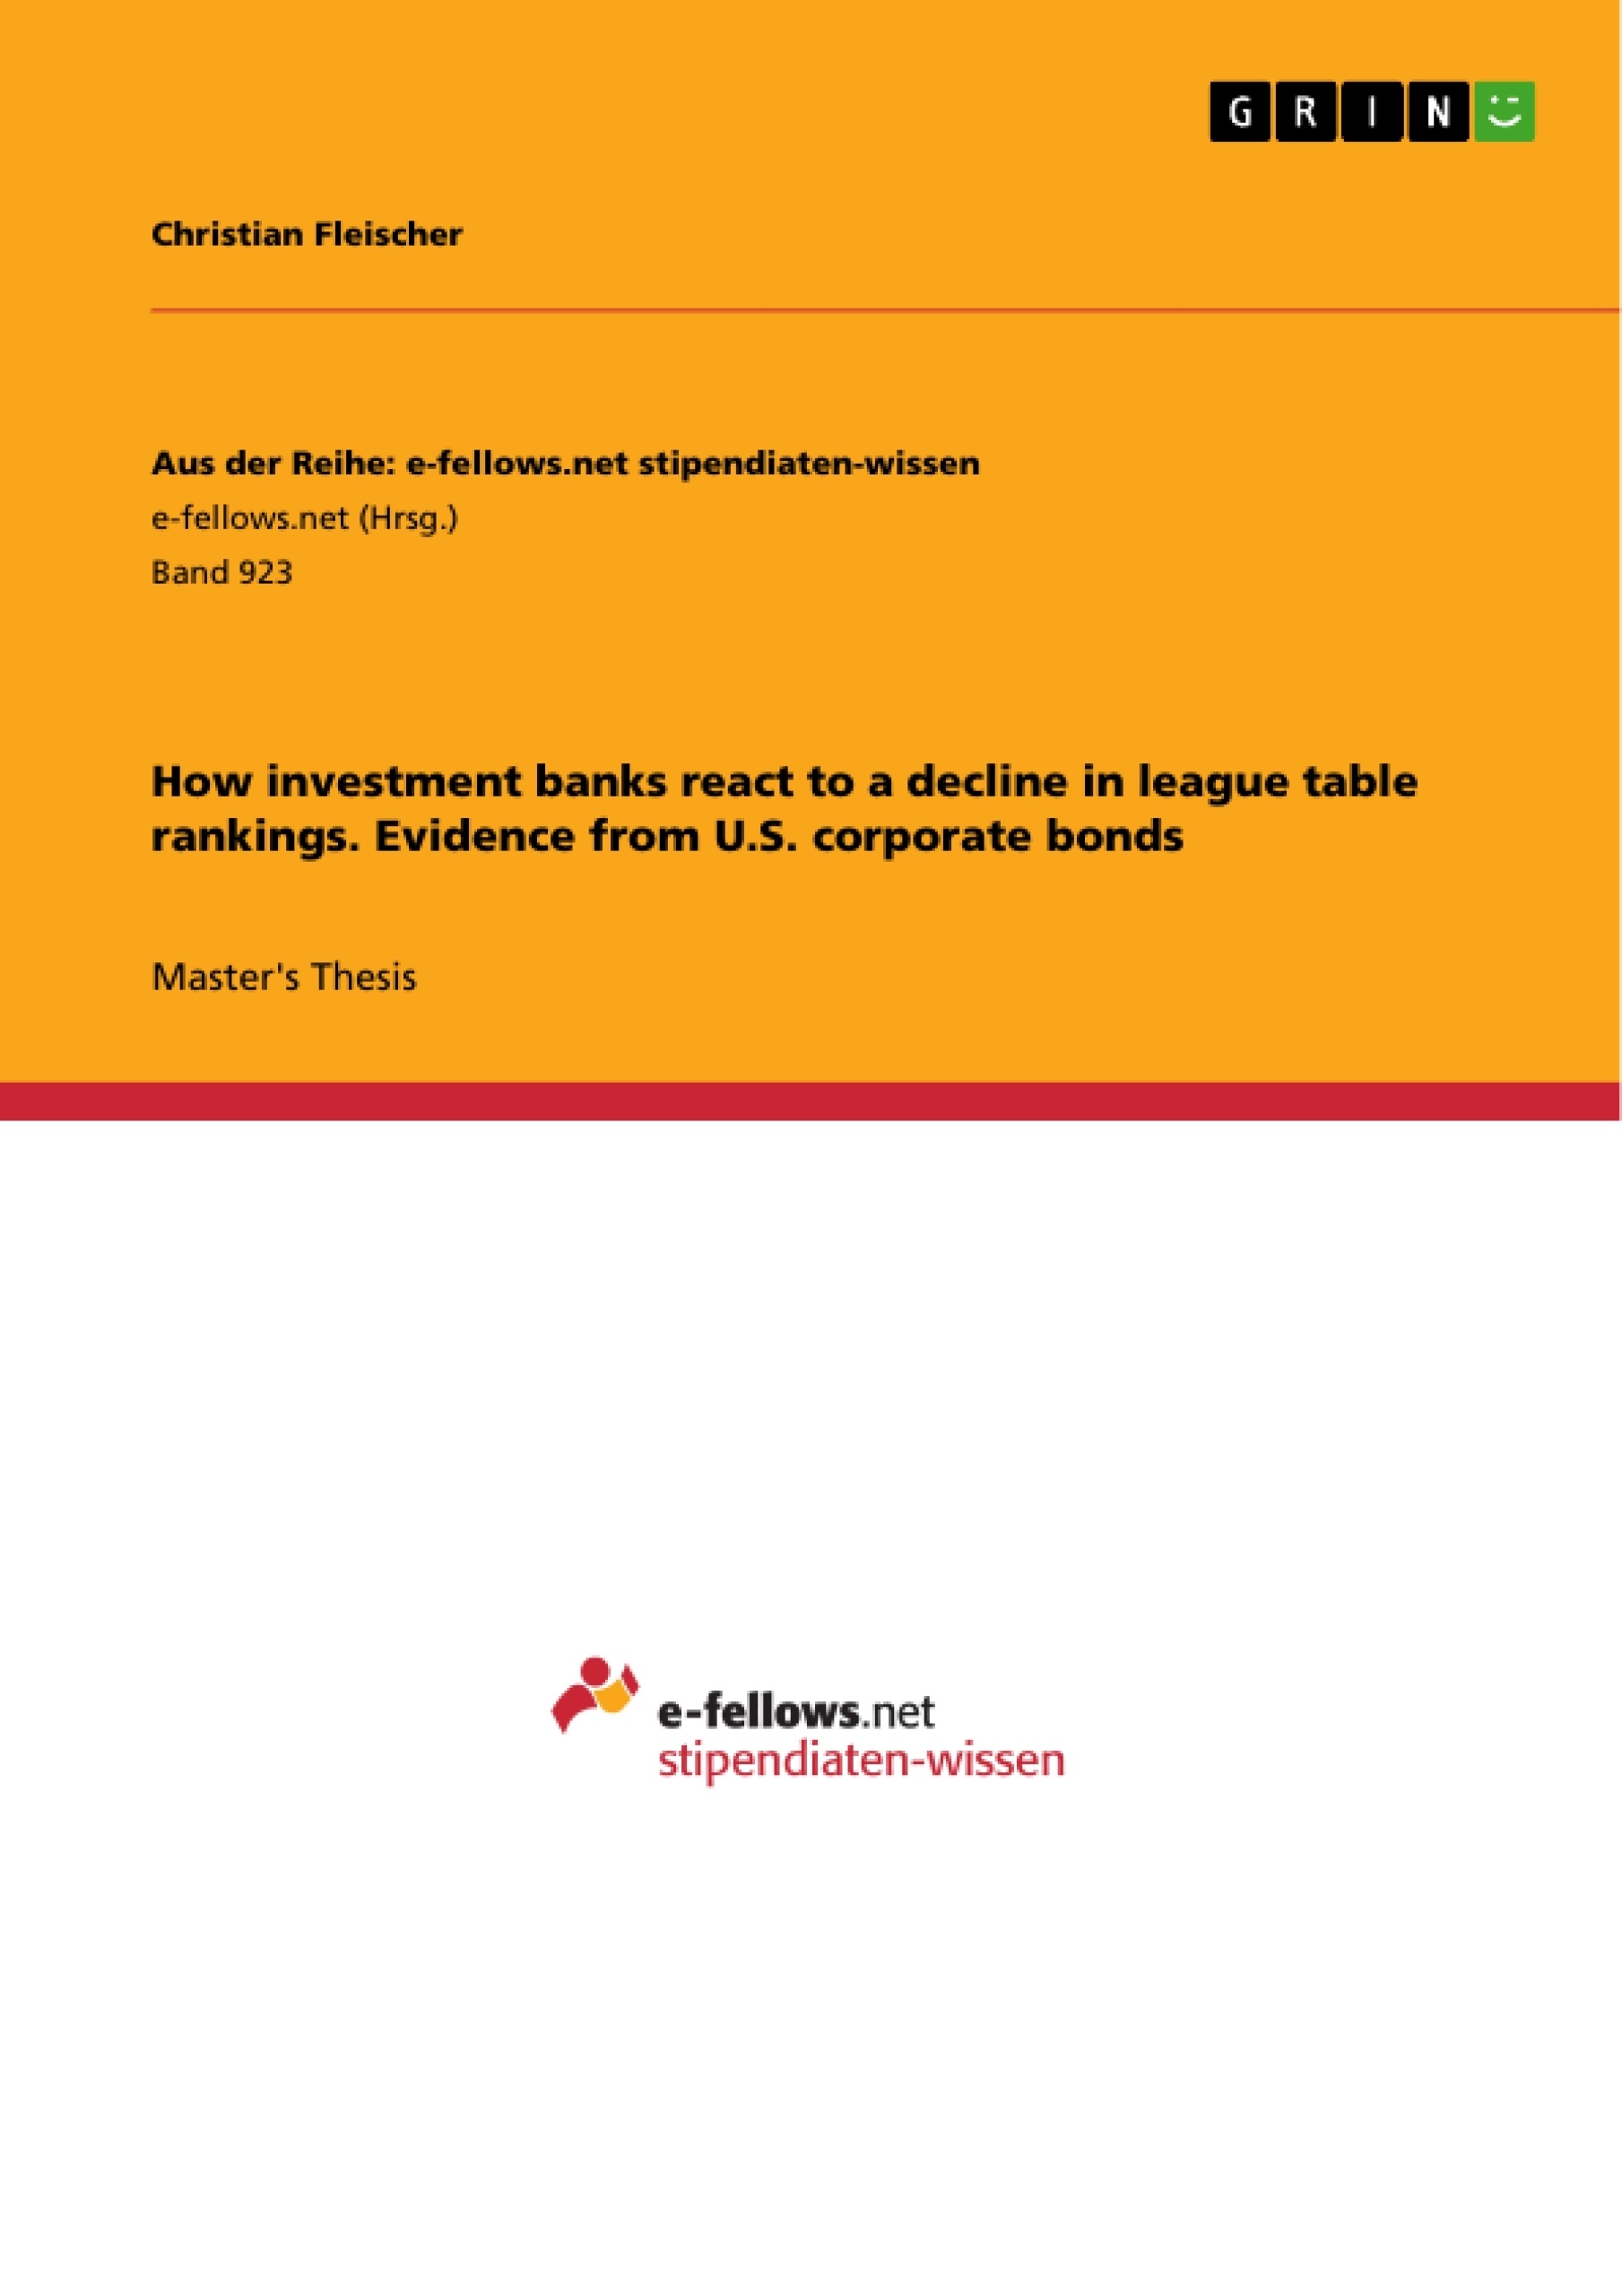 Title: How investment banks react to a decline in league table rankings. Evidence from U.S. corporate bonds